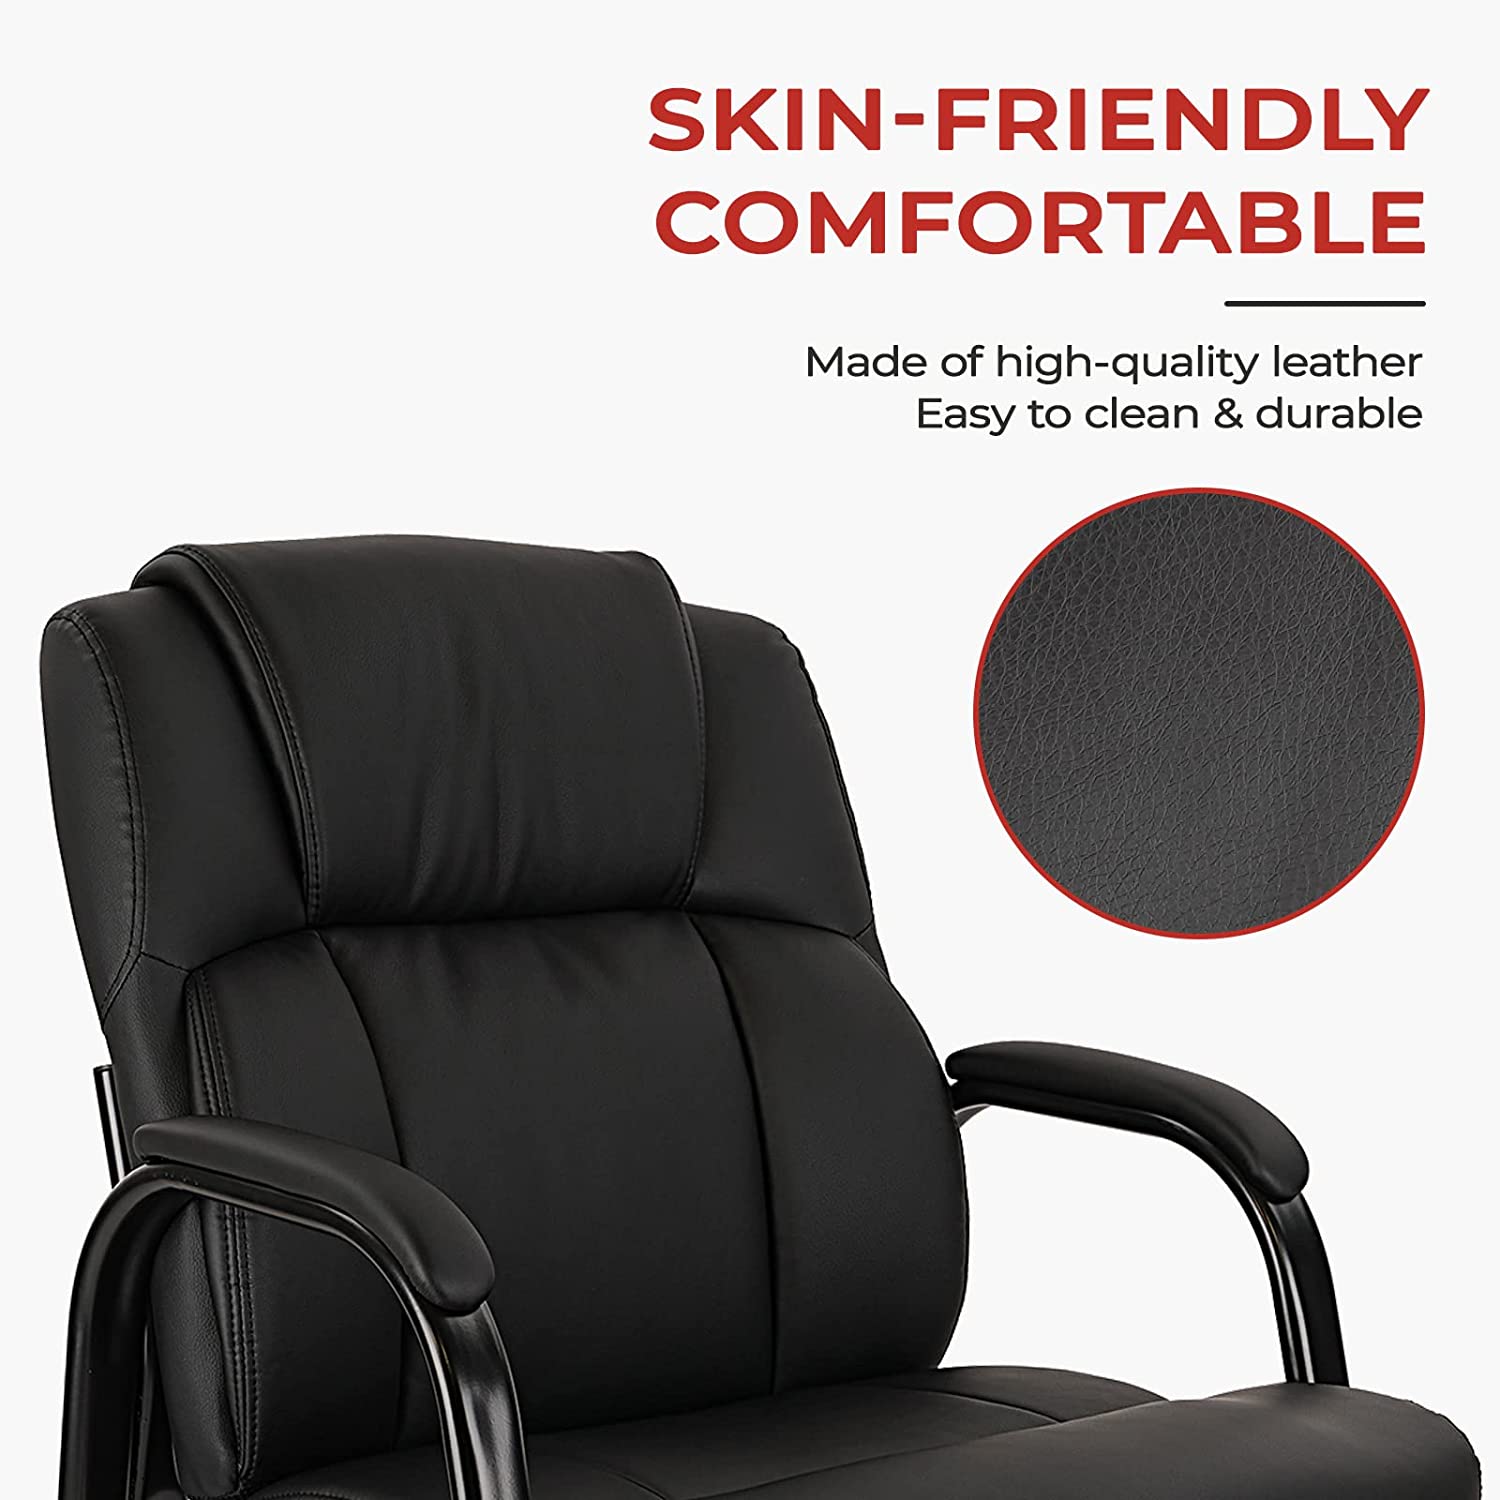 CLATINA Leather Guest Chair with Padded Arm Rest and Sled Base Meeting Conference and Waiting Room Side Office Home BIFMA Certified Black 2 Pack - image 3 of 6